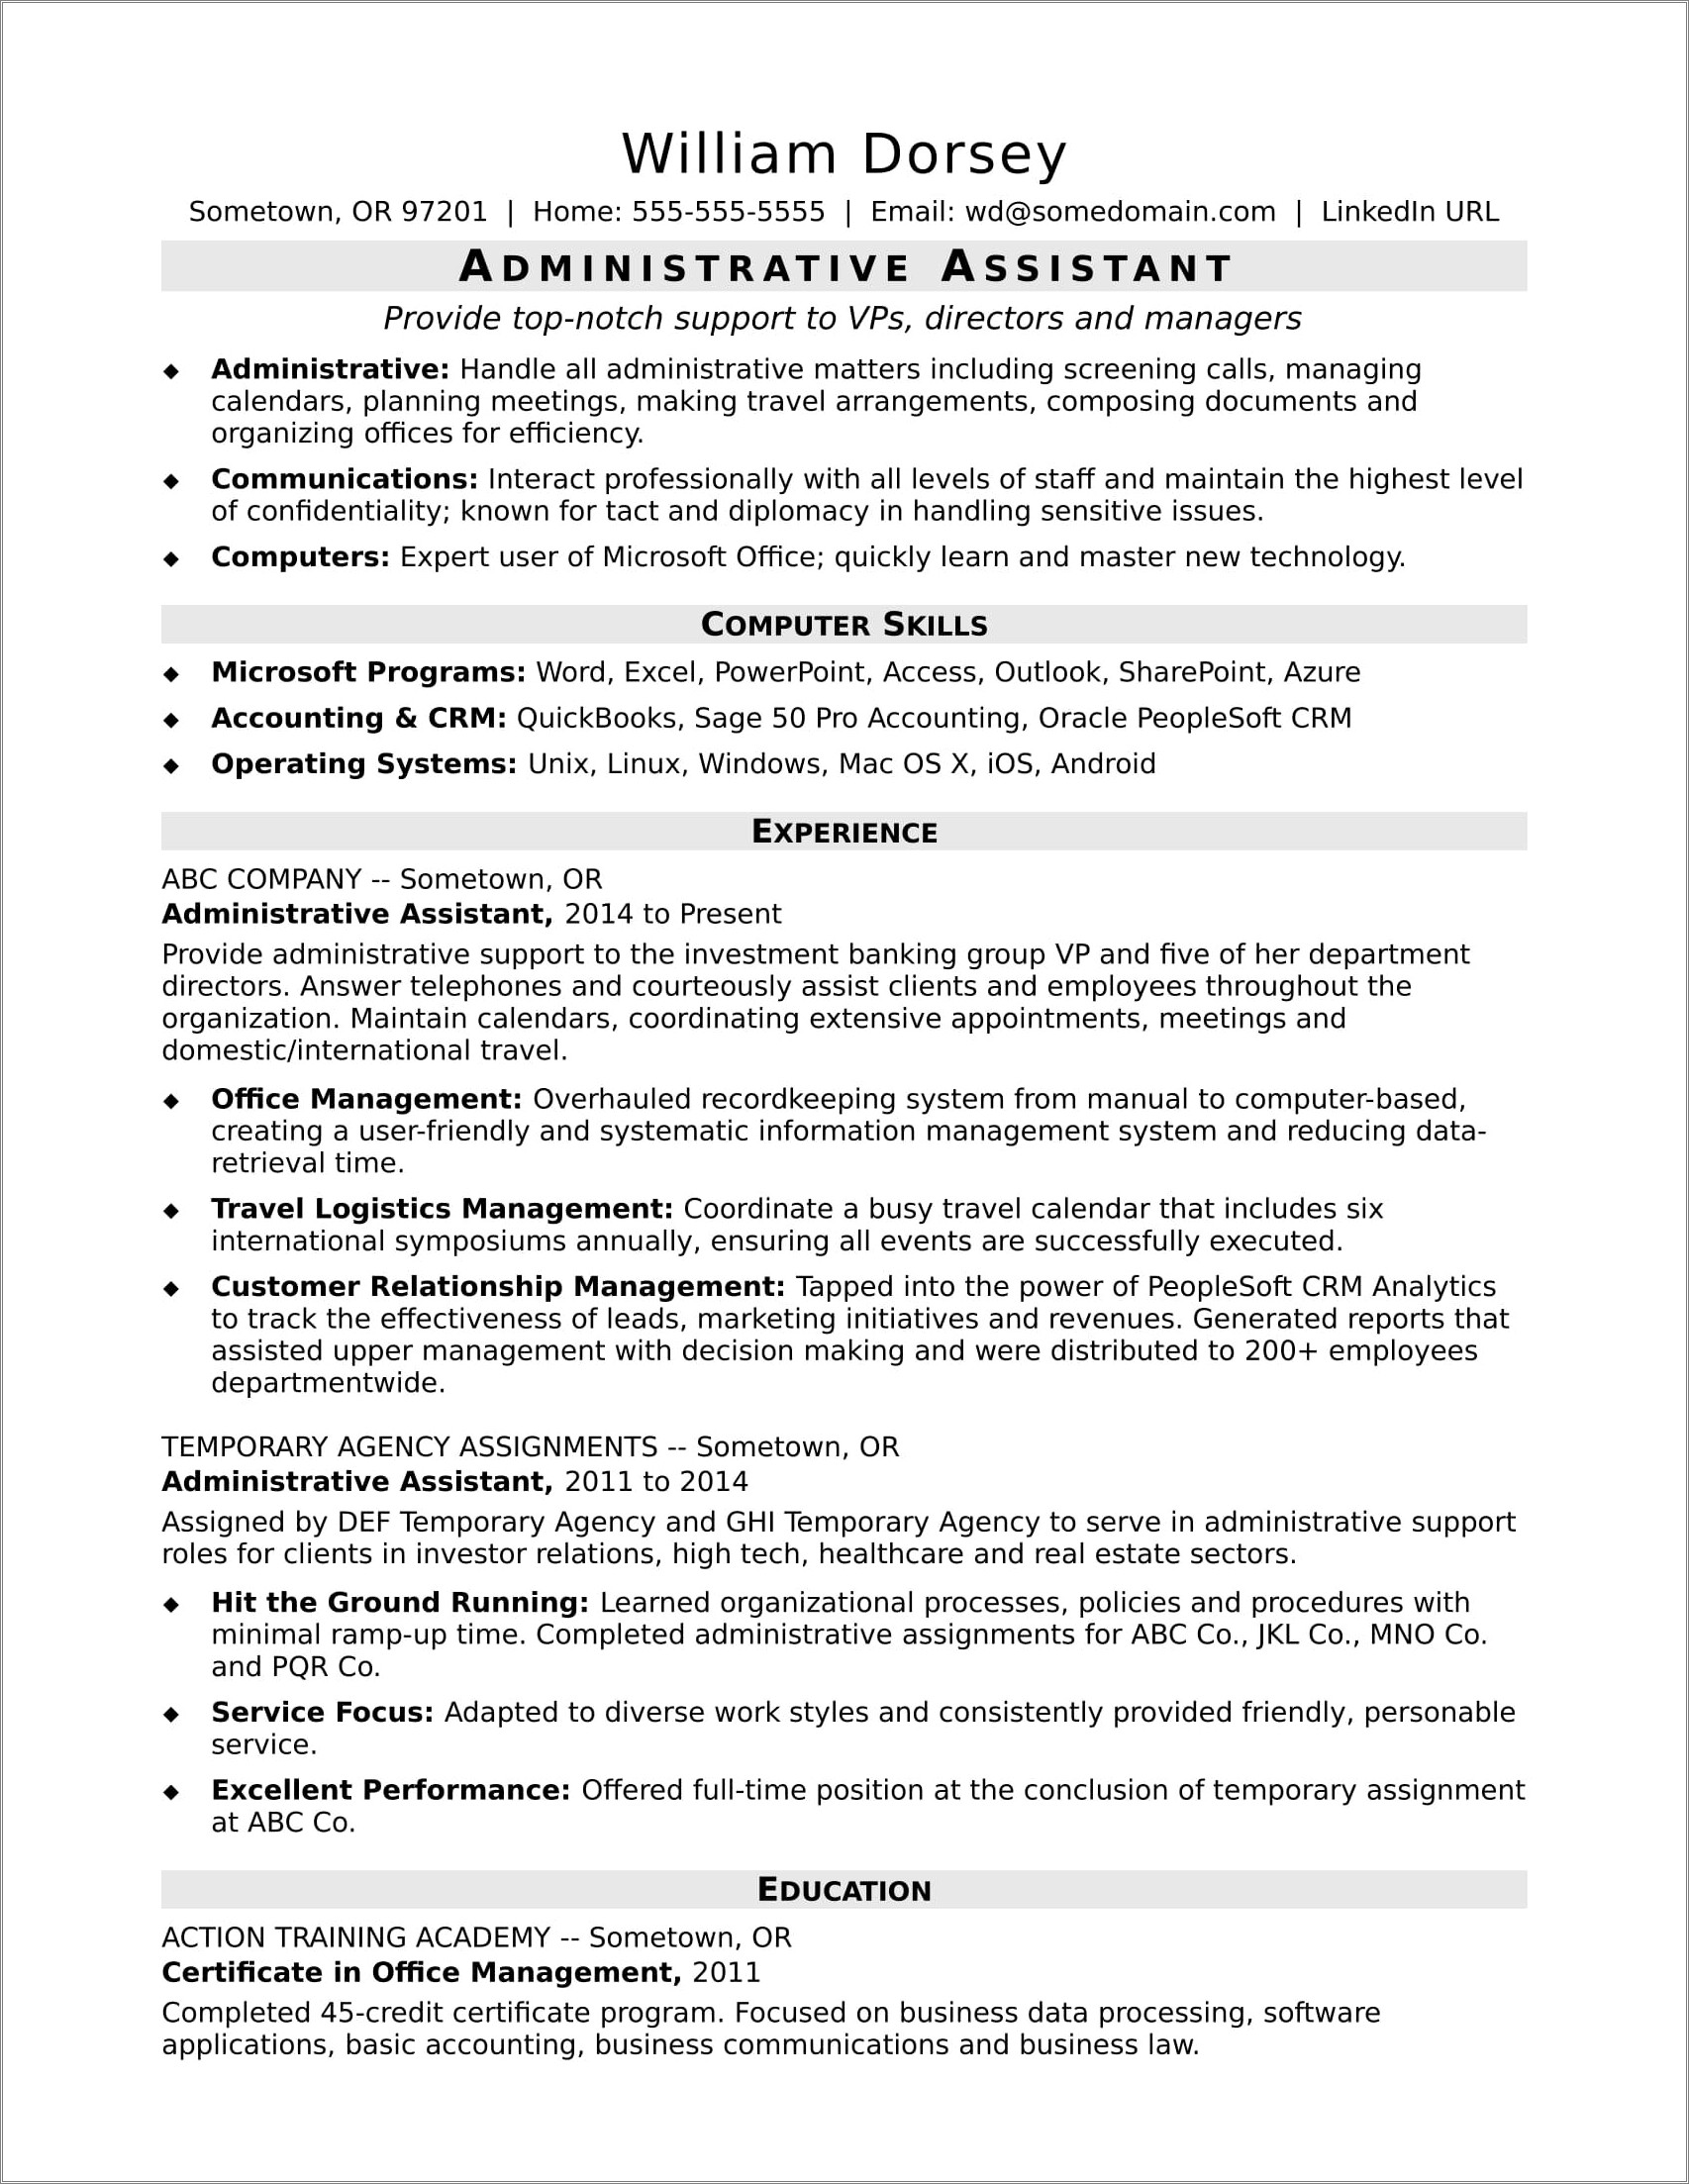 Best Professional Summary For Resume For Administrative Assistant